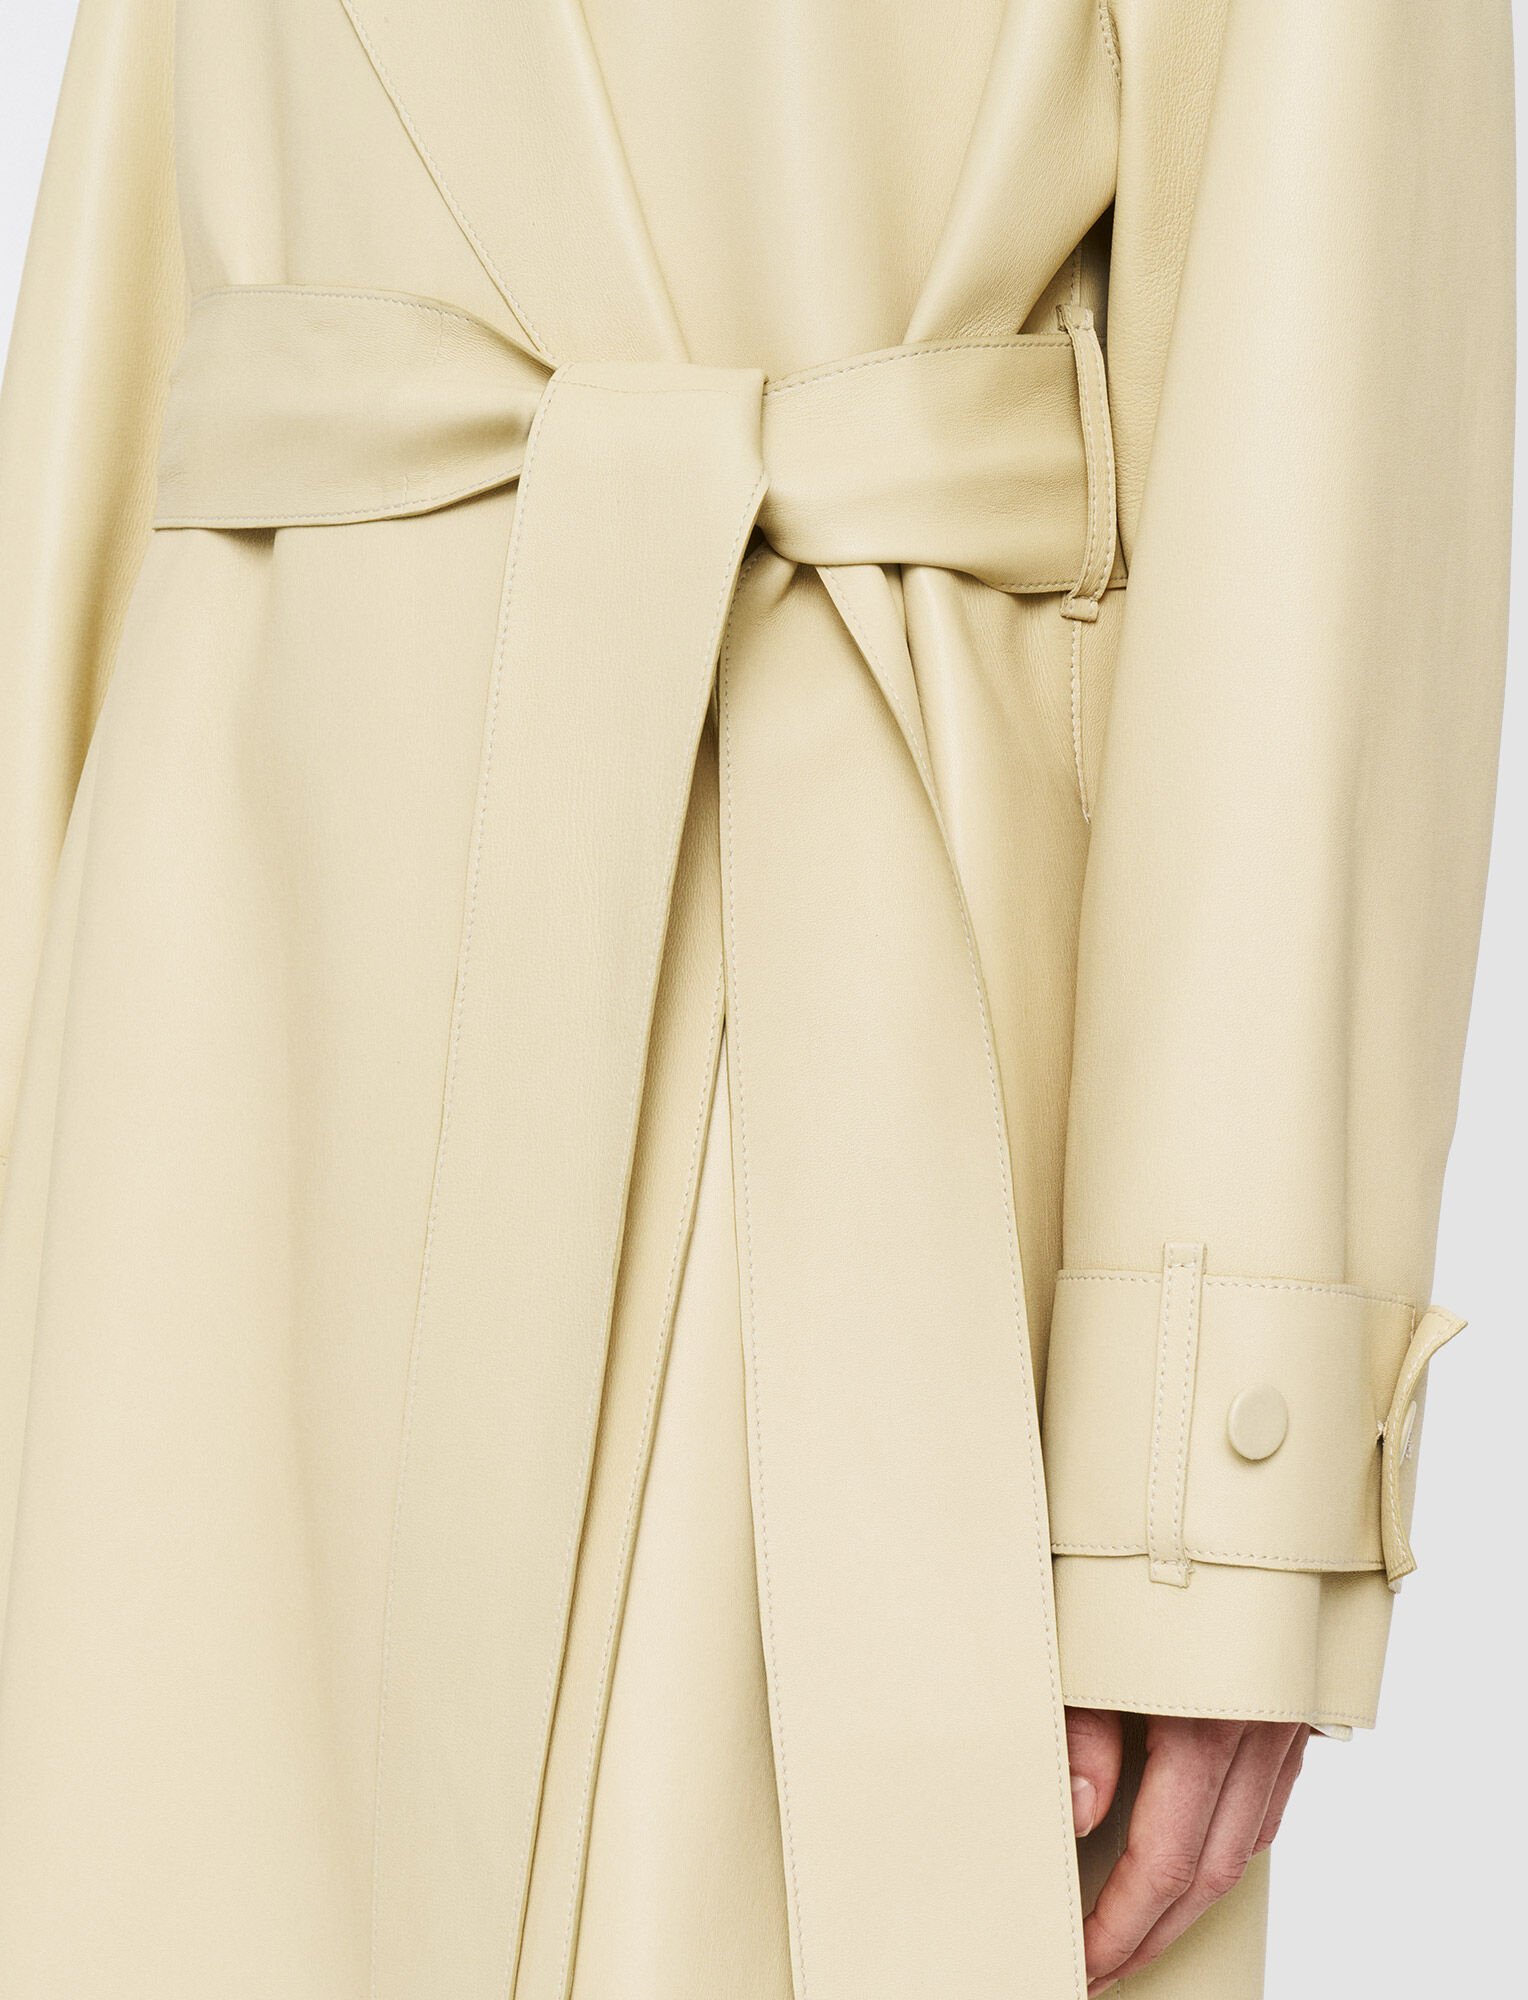 Joseph, Bonded Leather Courty Coat, in Pale Olive